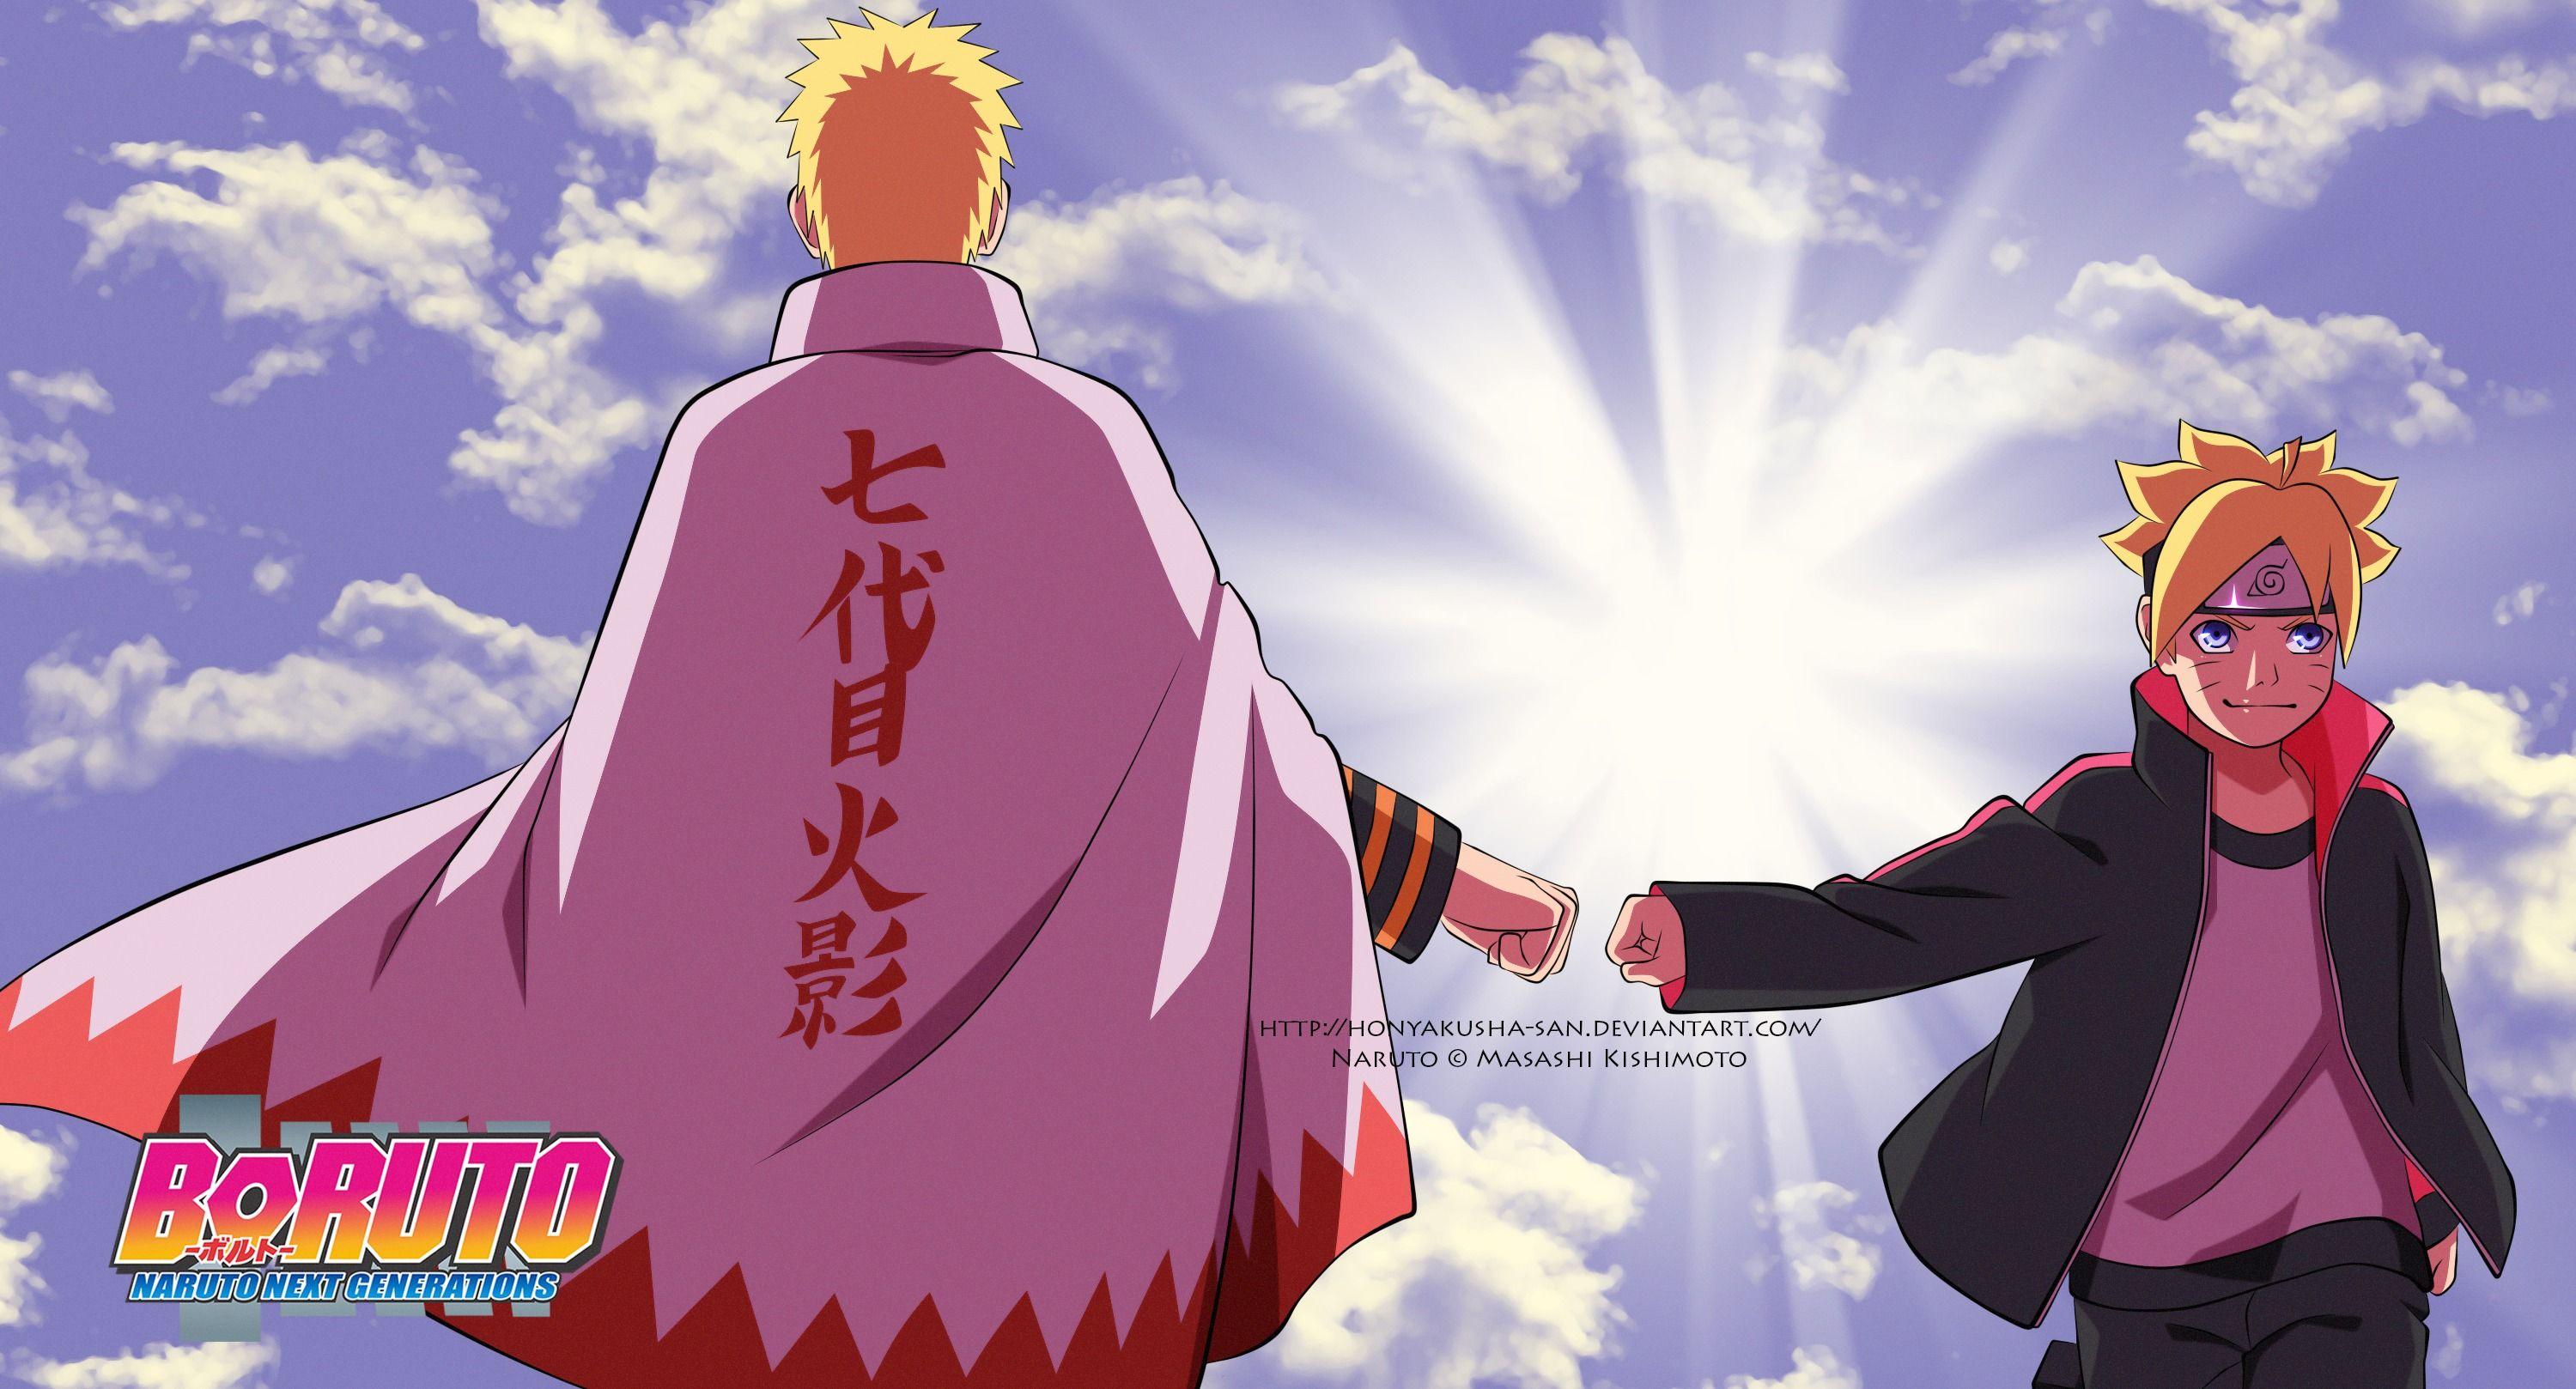 Download for free wallpaper from anime Boruto with tags: Macbook